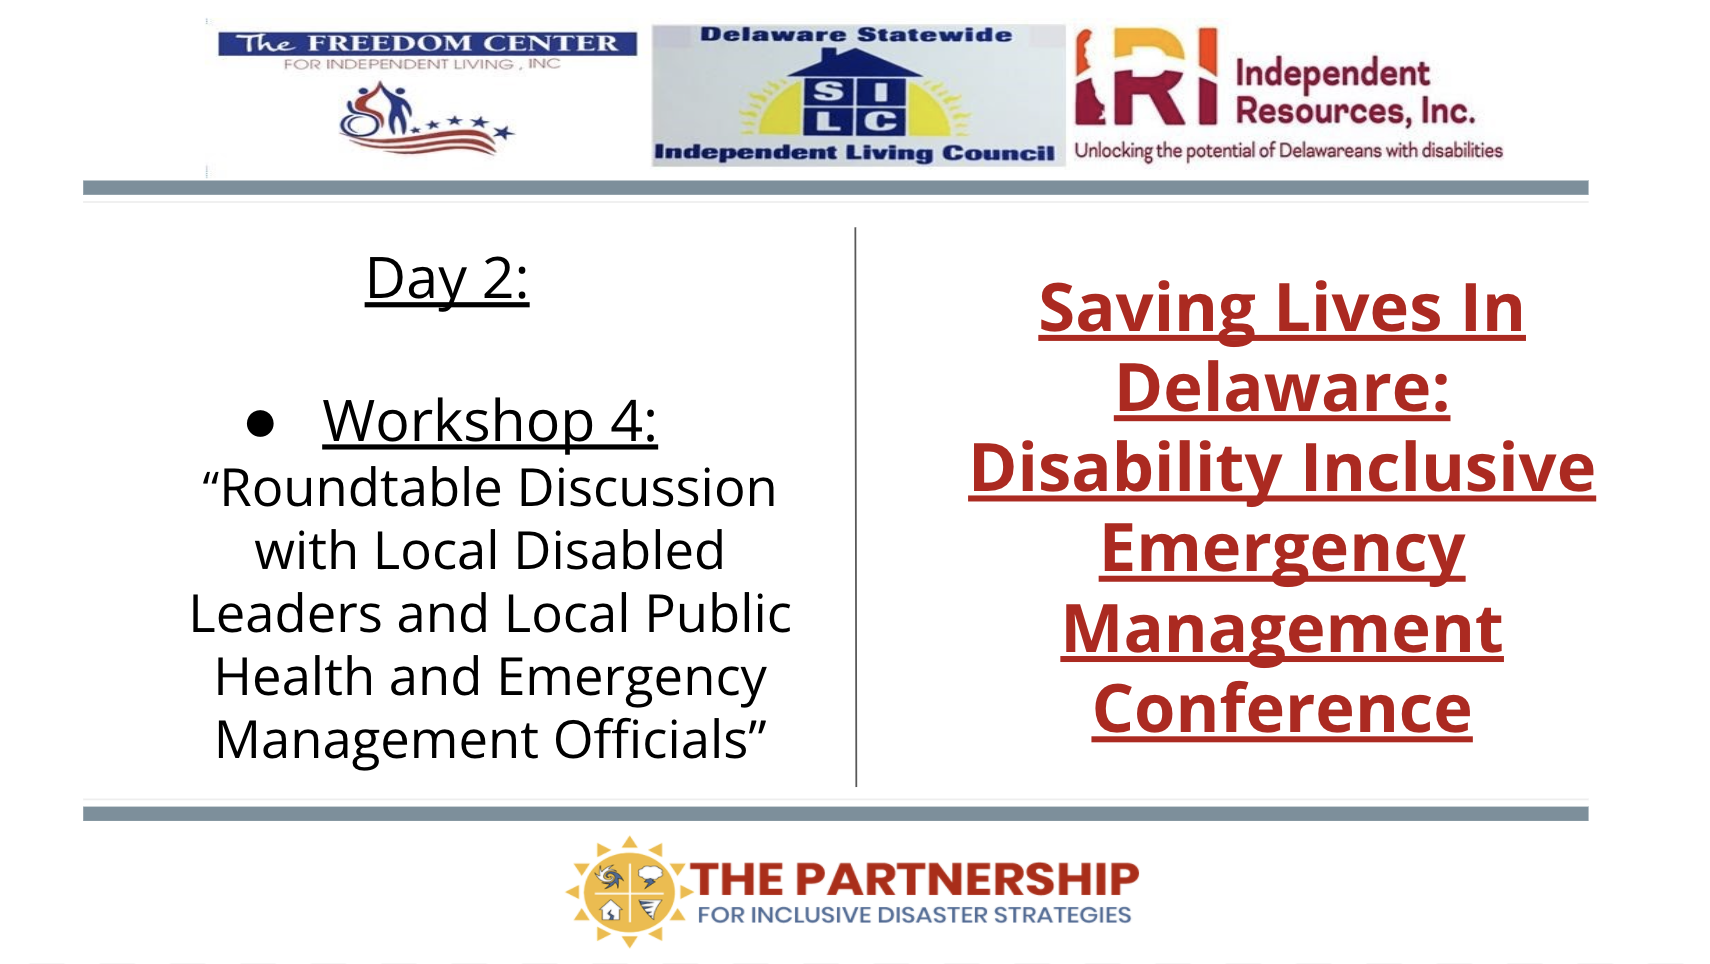 Image with the logos of The Partnership, FCIL, DE SILC, and IRI. Text reads "Day 2. Workshop 4, Roundtable Discussion with Local Disabled Leaders and Local Public Health and Emergency Management Officials”"